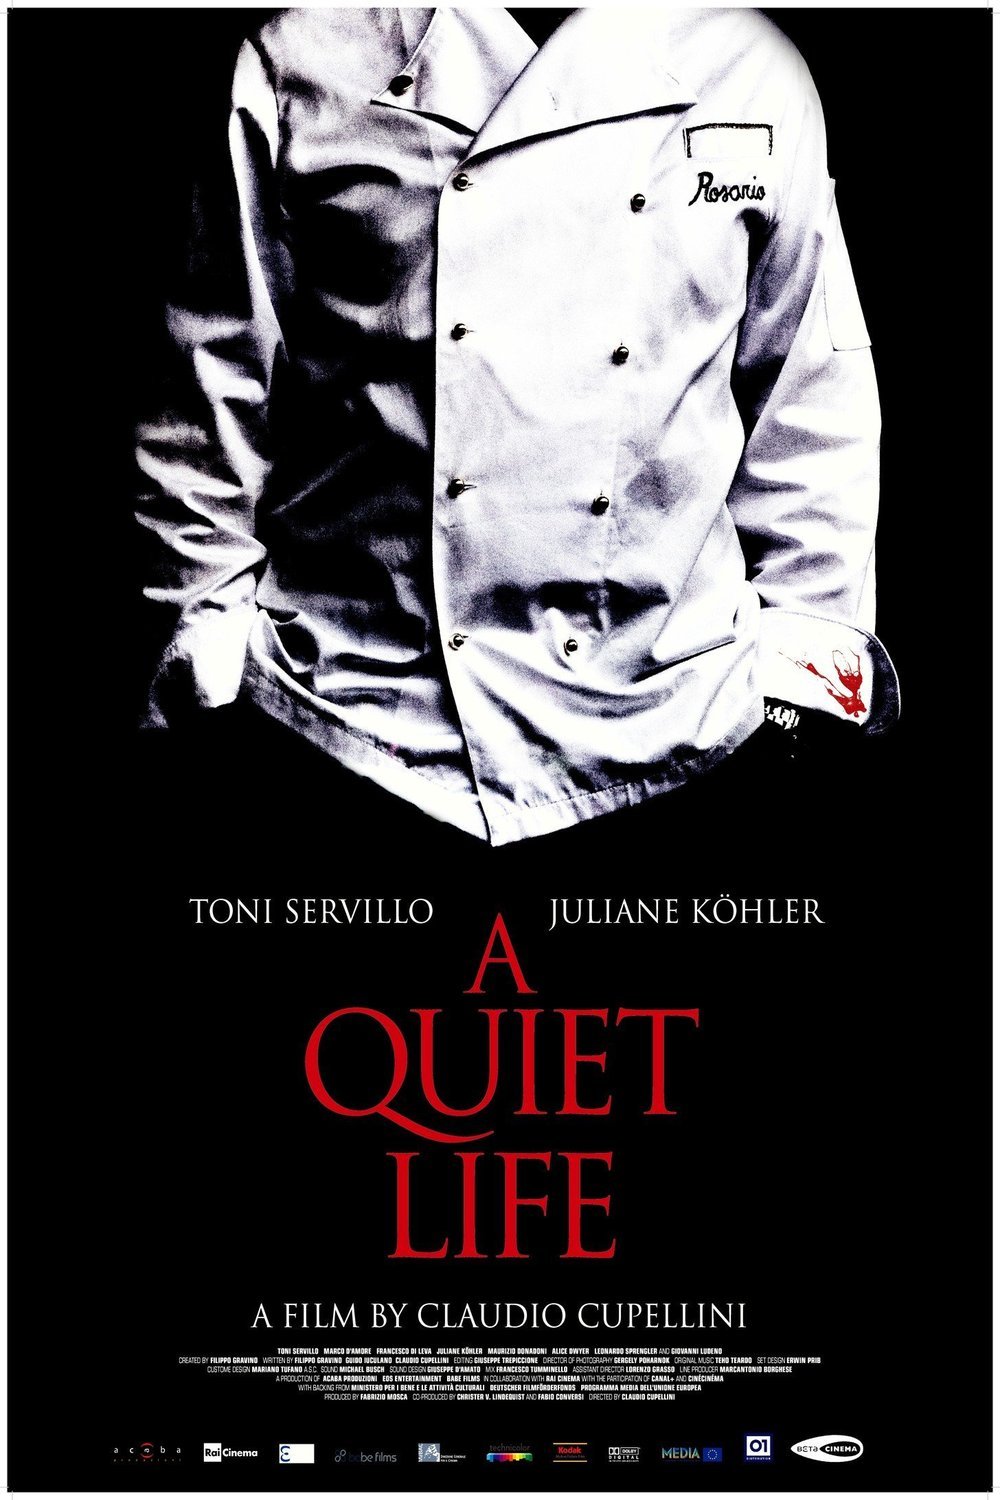 Poster of the movie A Quiet Life